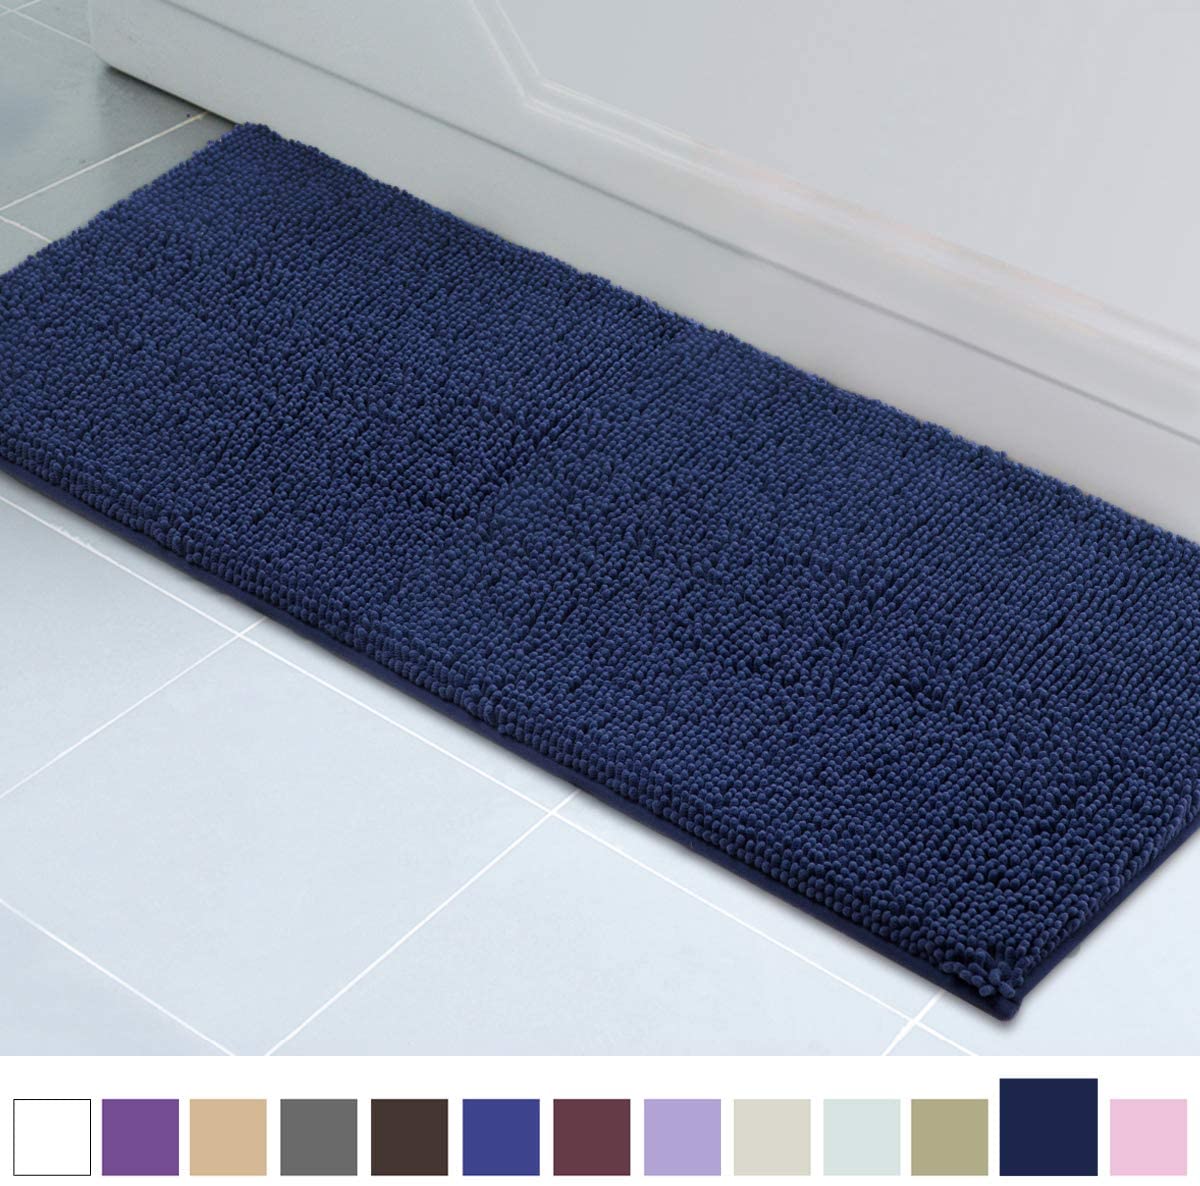 Details about   ITSOFT Non Slip Shaggy Chenille Bath Mat for Bathroom Rug Water Absorbent Carpet 